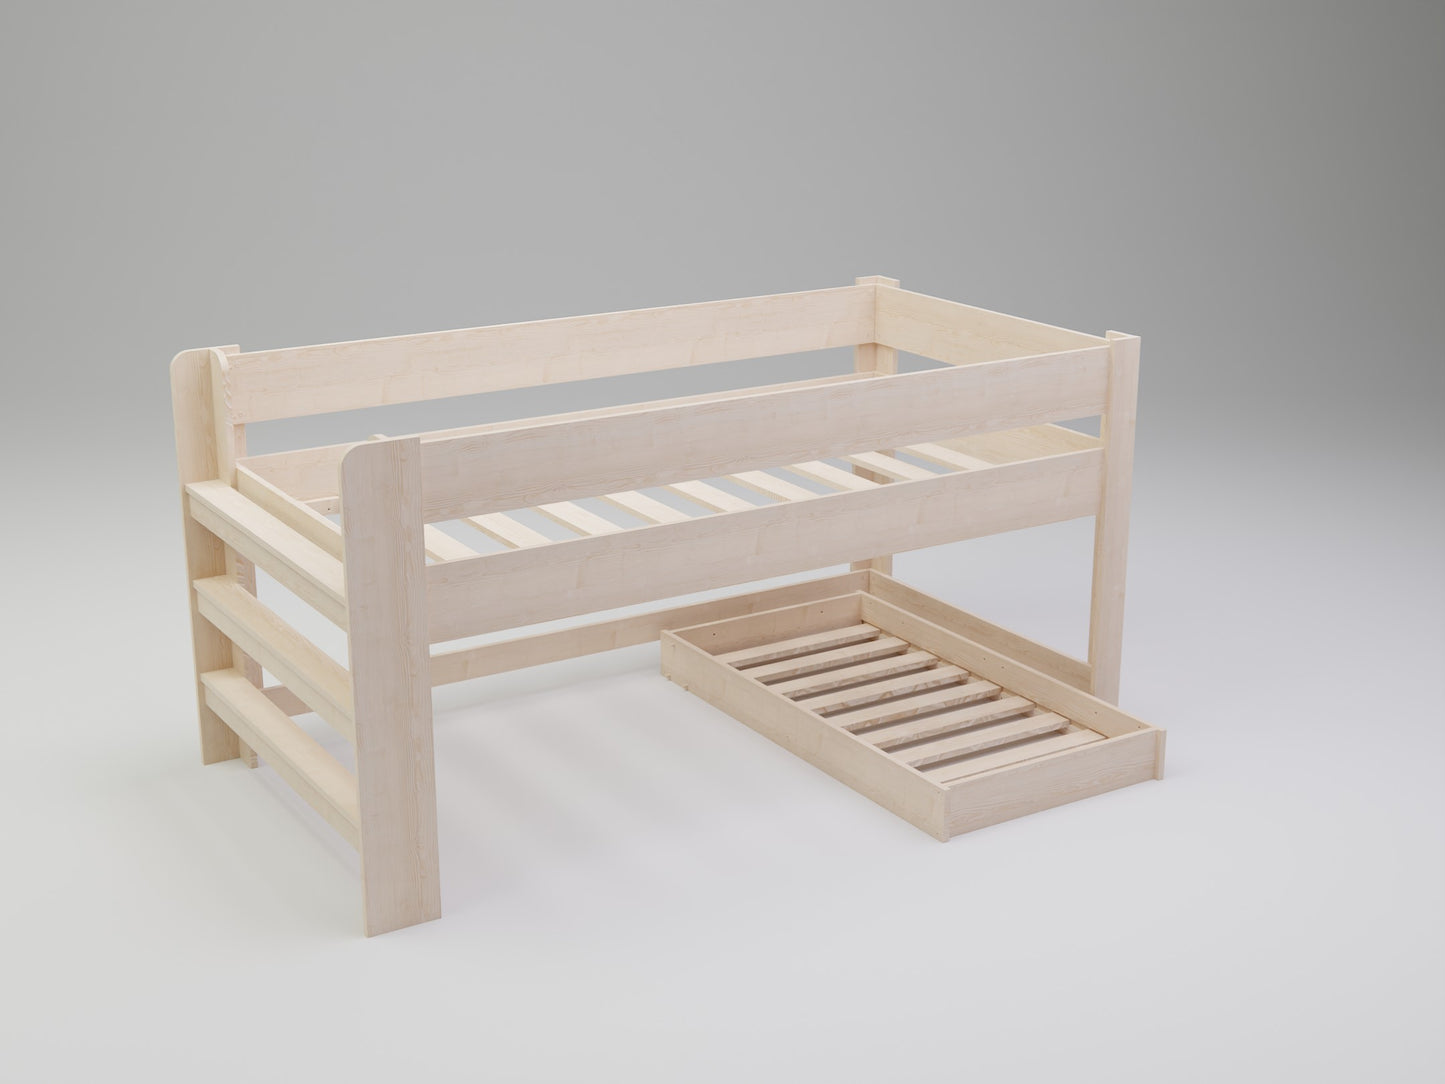 Tailor-made ladder setups! Choose from 3 configurations for our unique L shaped bunkbed to fit your space.